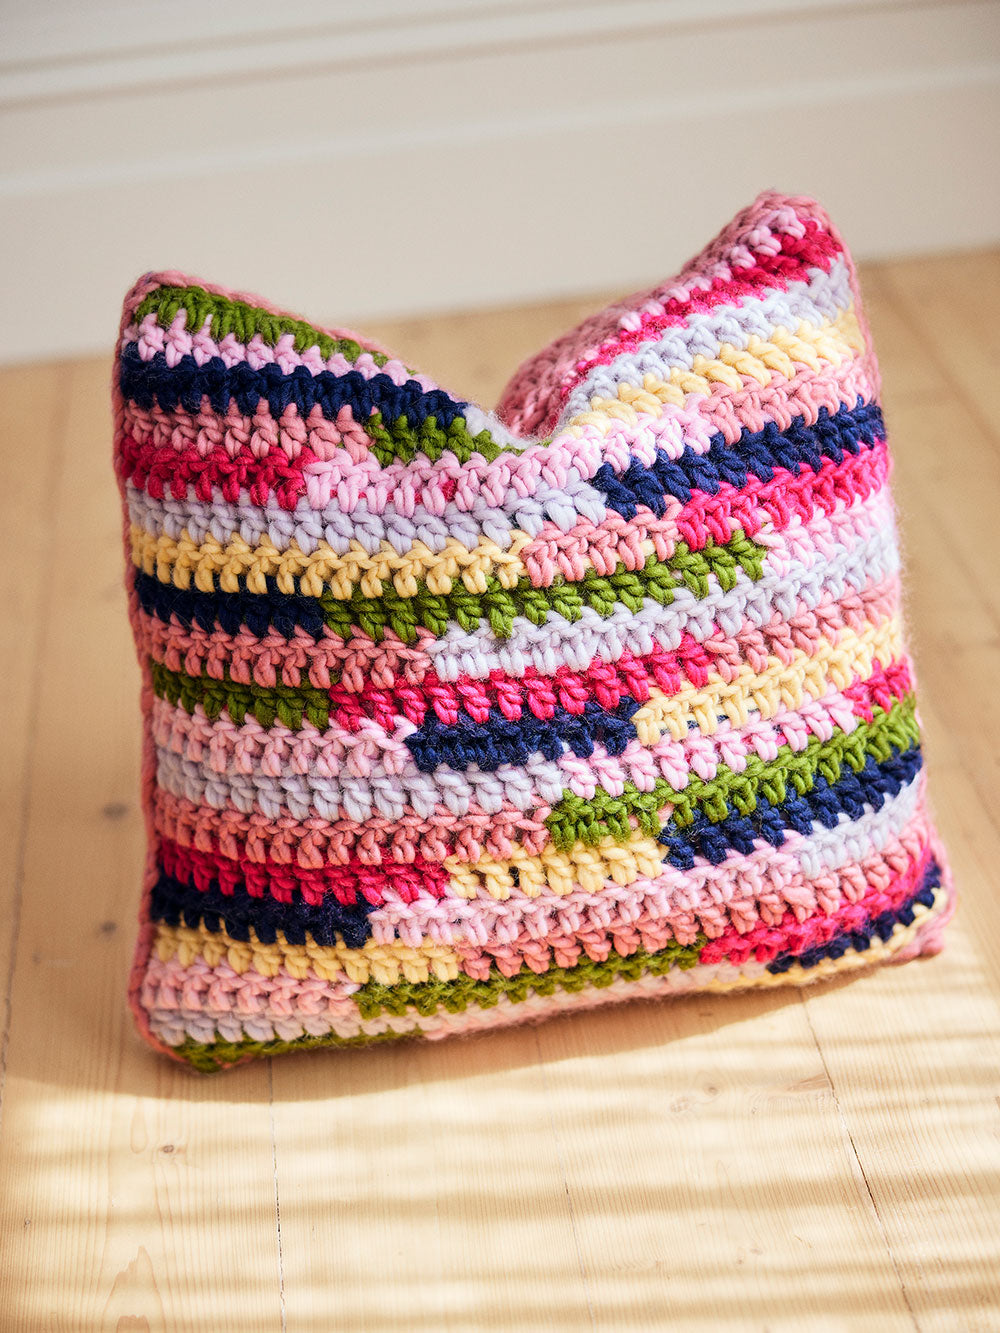 Image of a textured and colourful crocheted cushion